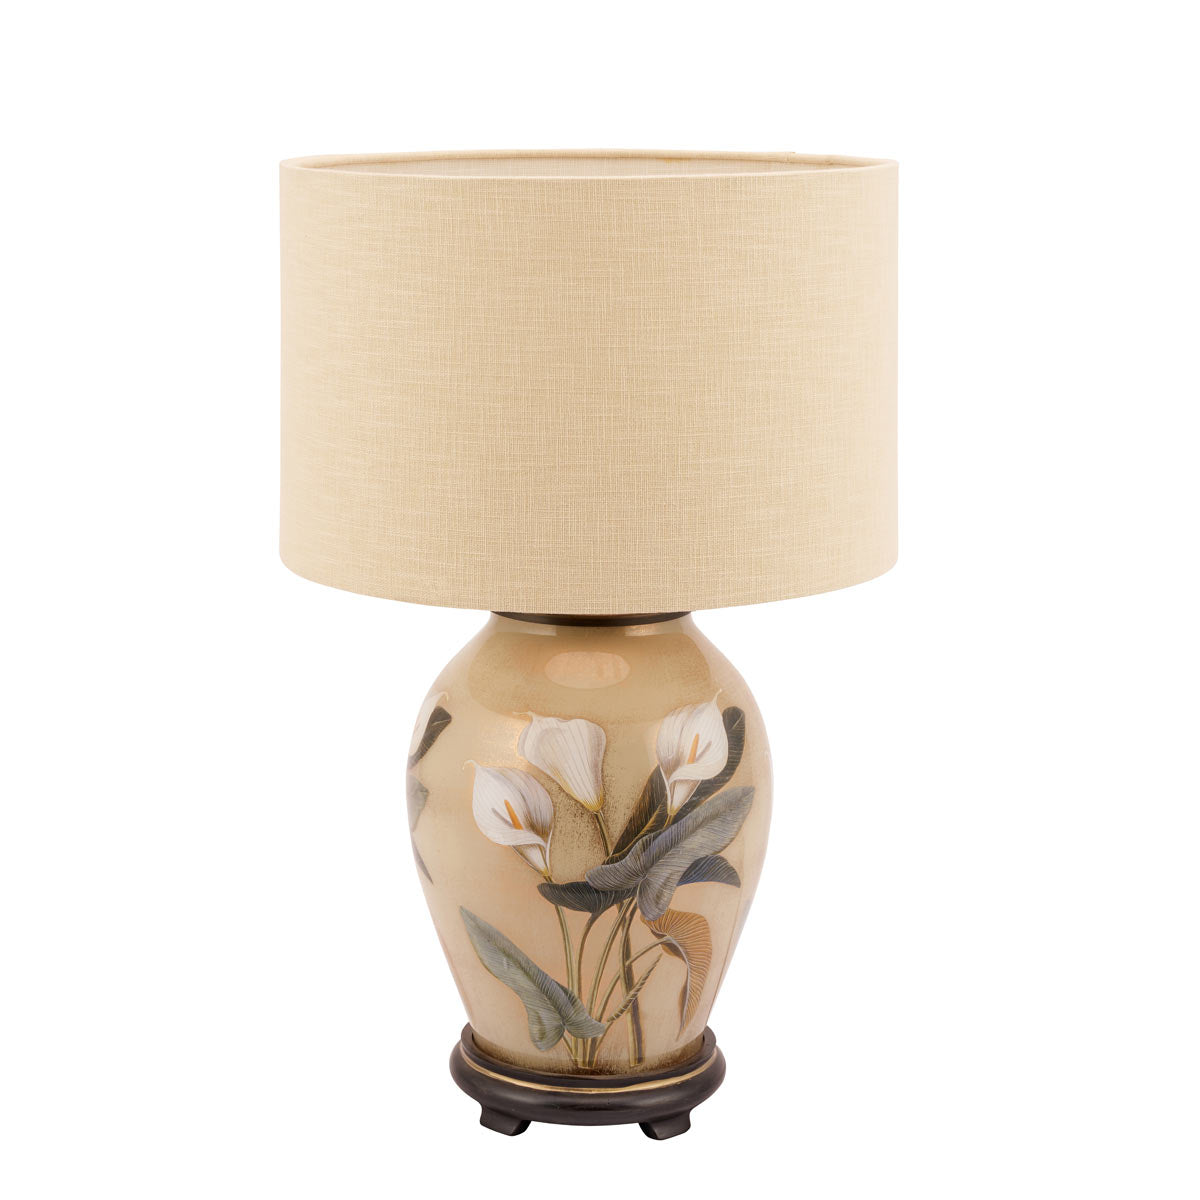 Medium sized lily table lamp from Jenny Worrall with cylinder lampshade